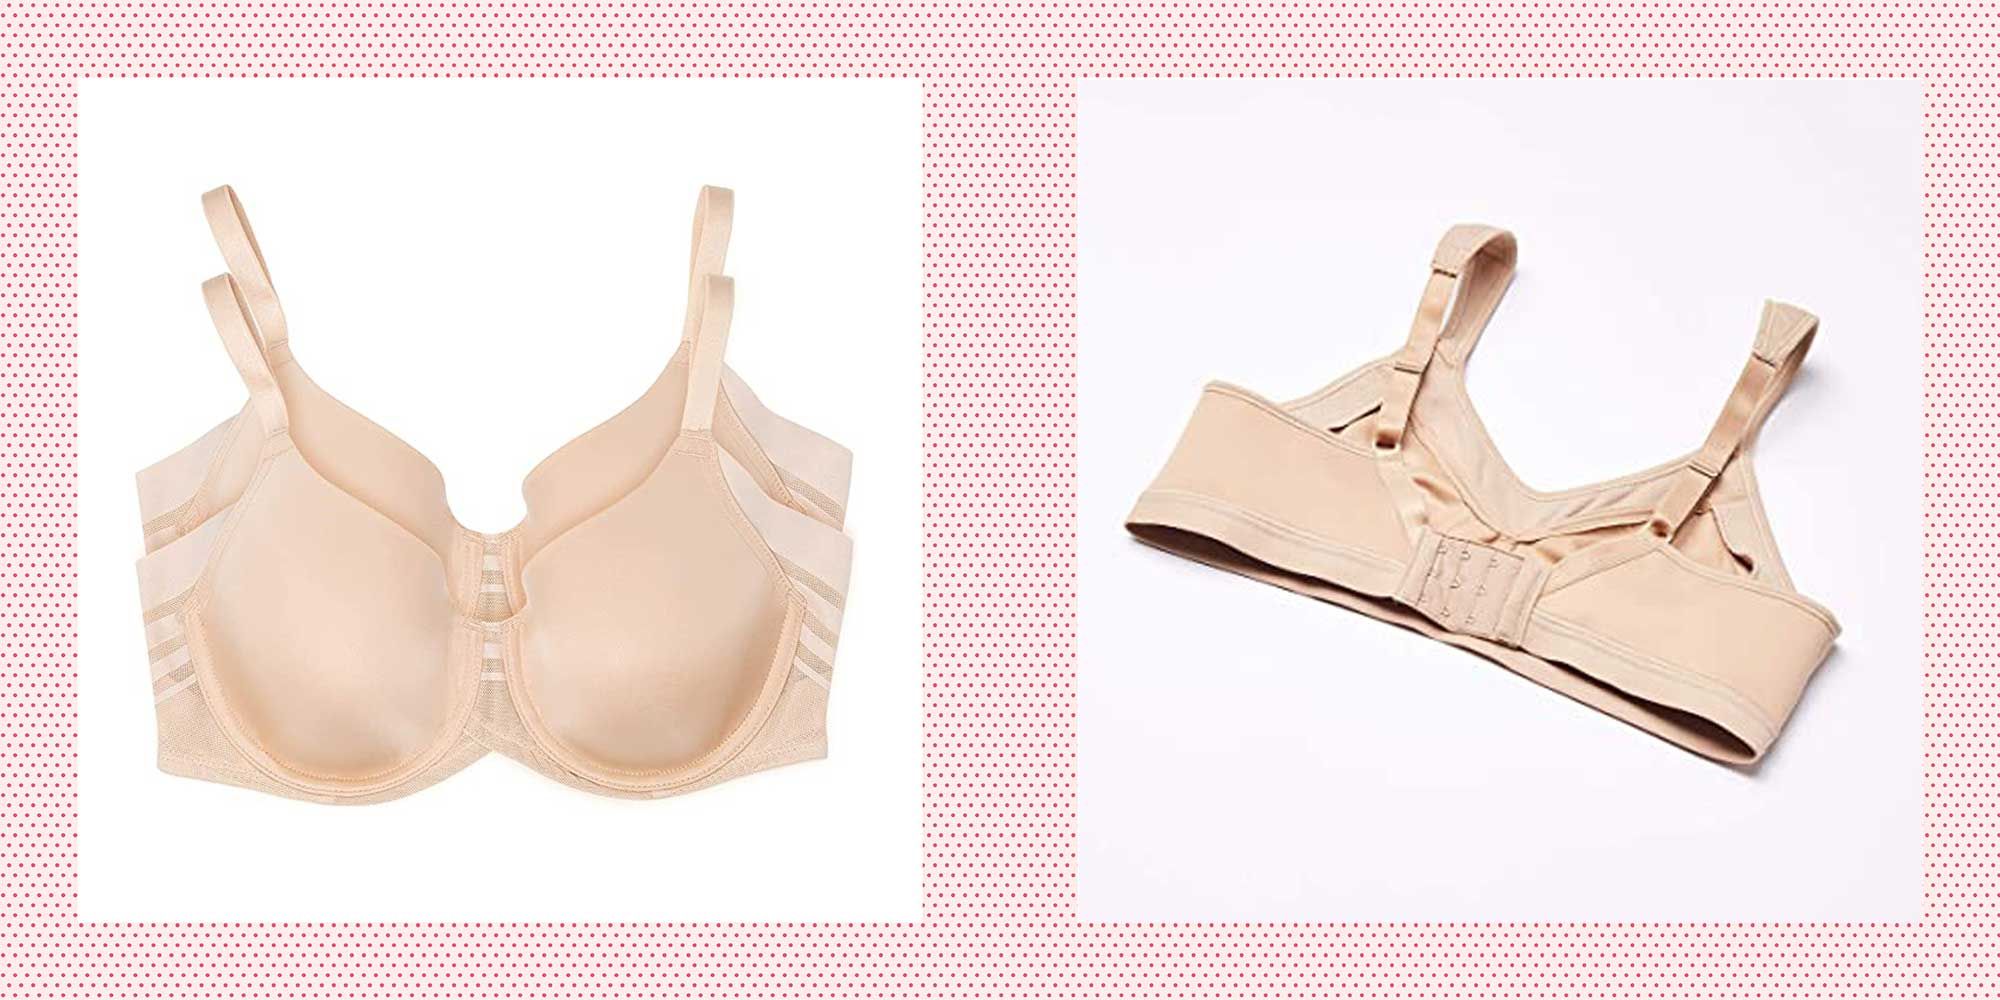 44DD-Sized Shoppers Call This the “Perfect T-Shirt” Bra” and It's 61% Off  at  Right Now